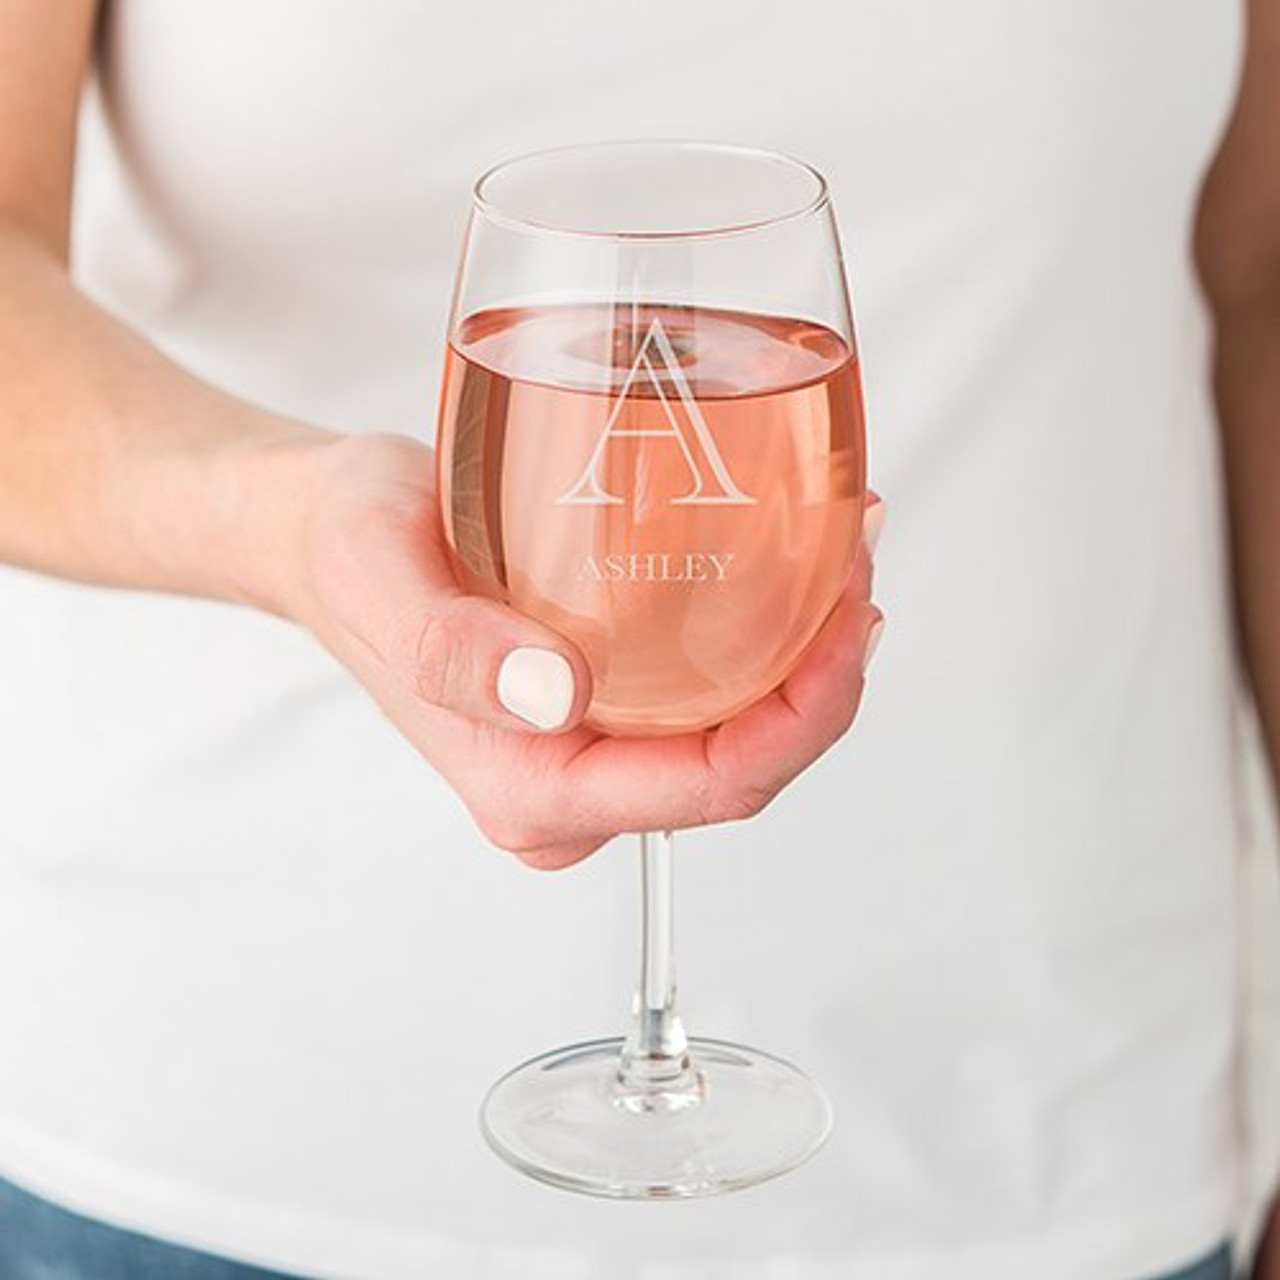 https://cdn11.bigcommerce.com/s-h9yhhjf2jt/images/stencil/1280x1280/products/962/6575/4810-p-8423-106-i_large-personalized-wine-glass-classic-monogram857aabba678f0d5bcdca37b6bdc1ee57__00123.1542059252.jpg?c=2